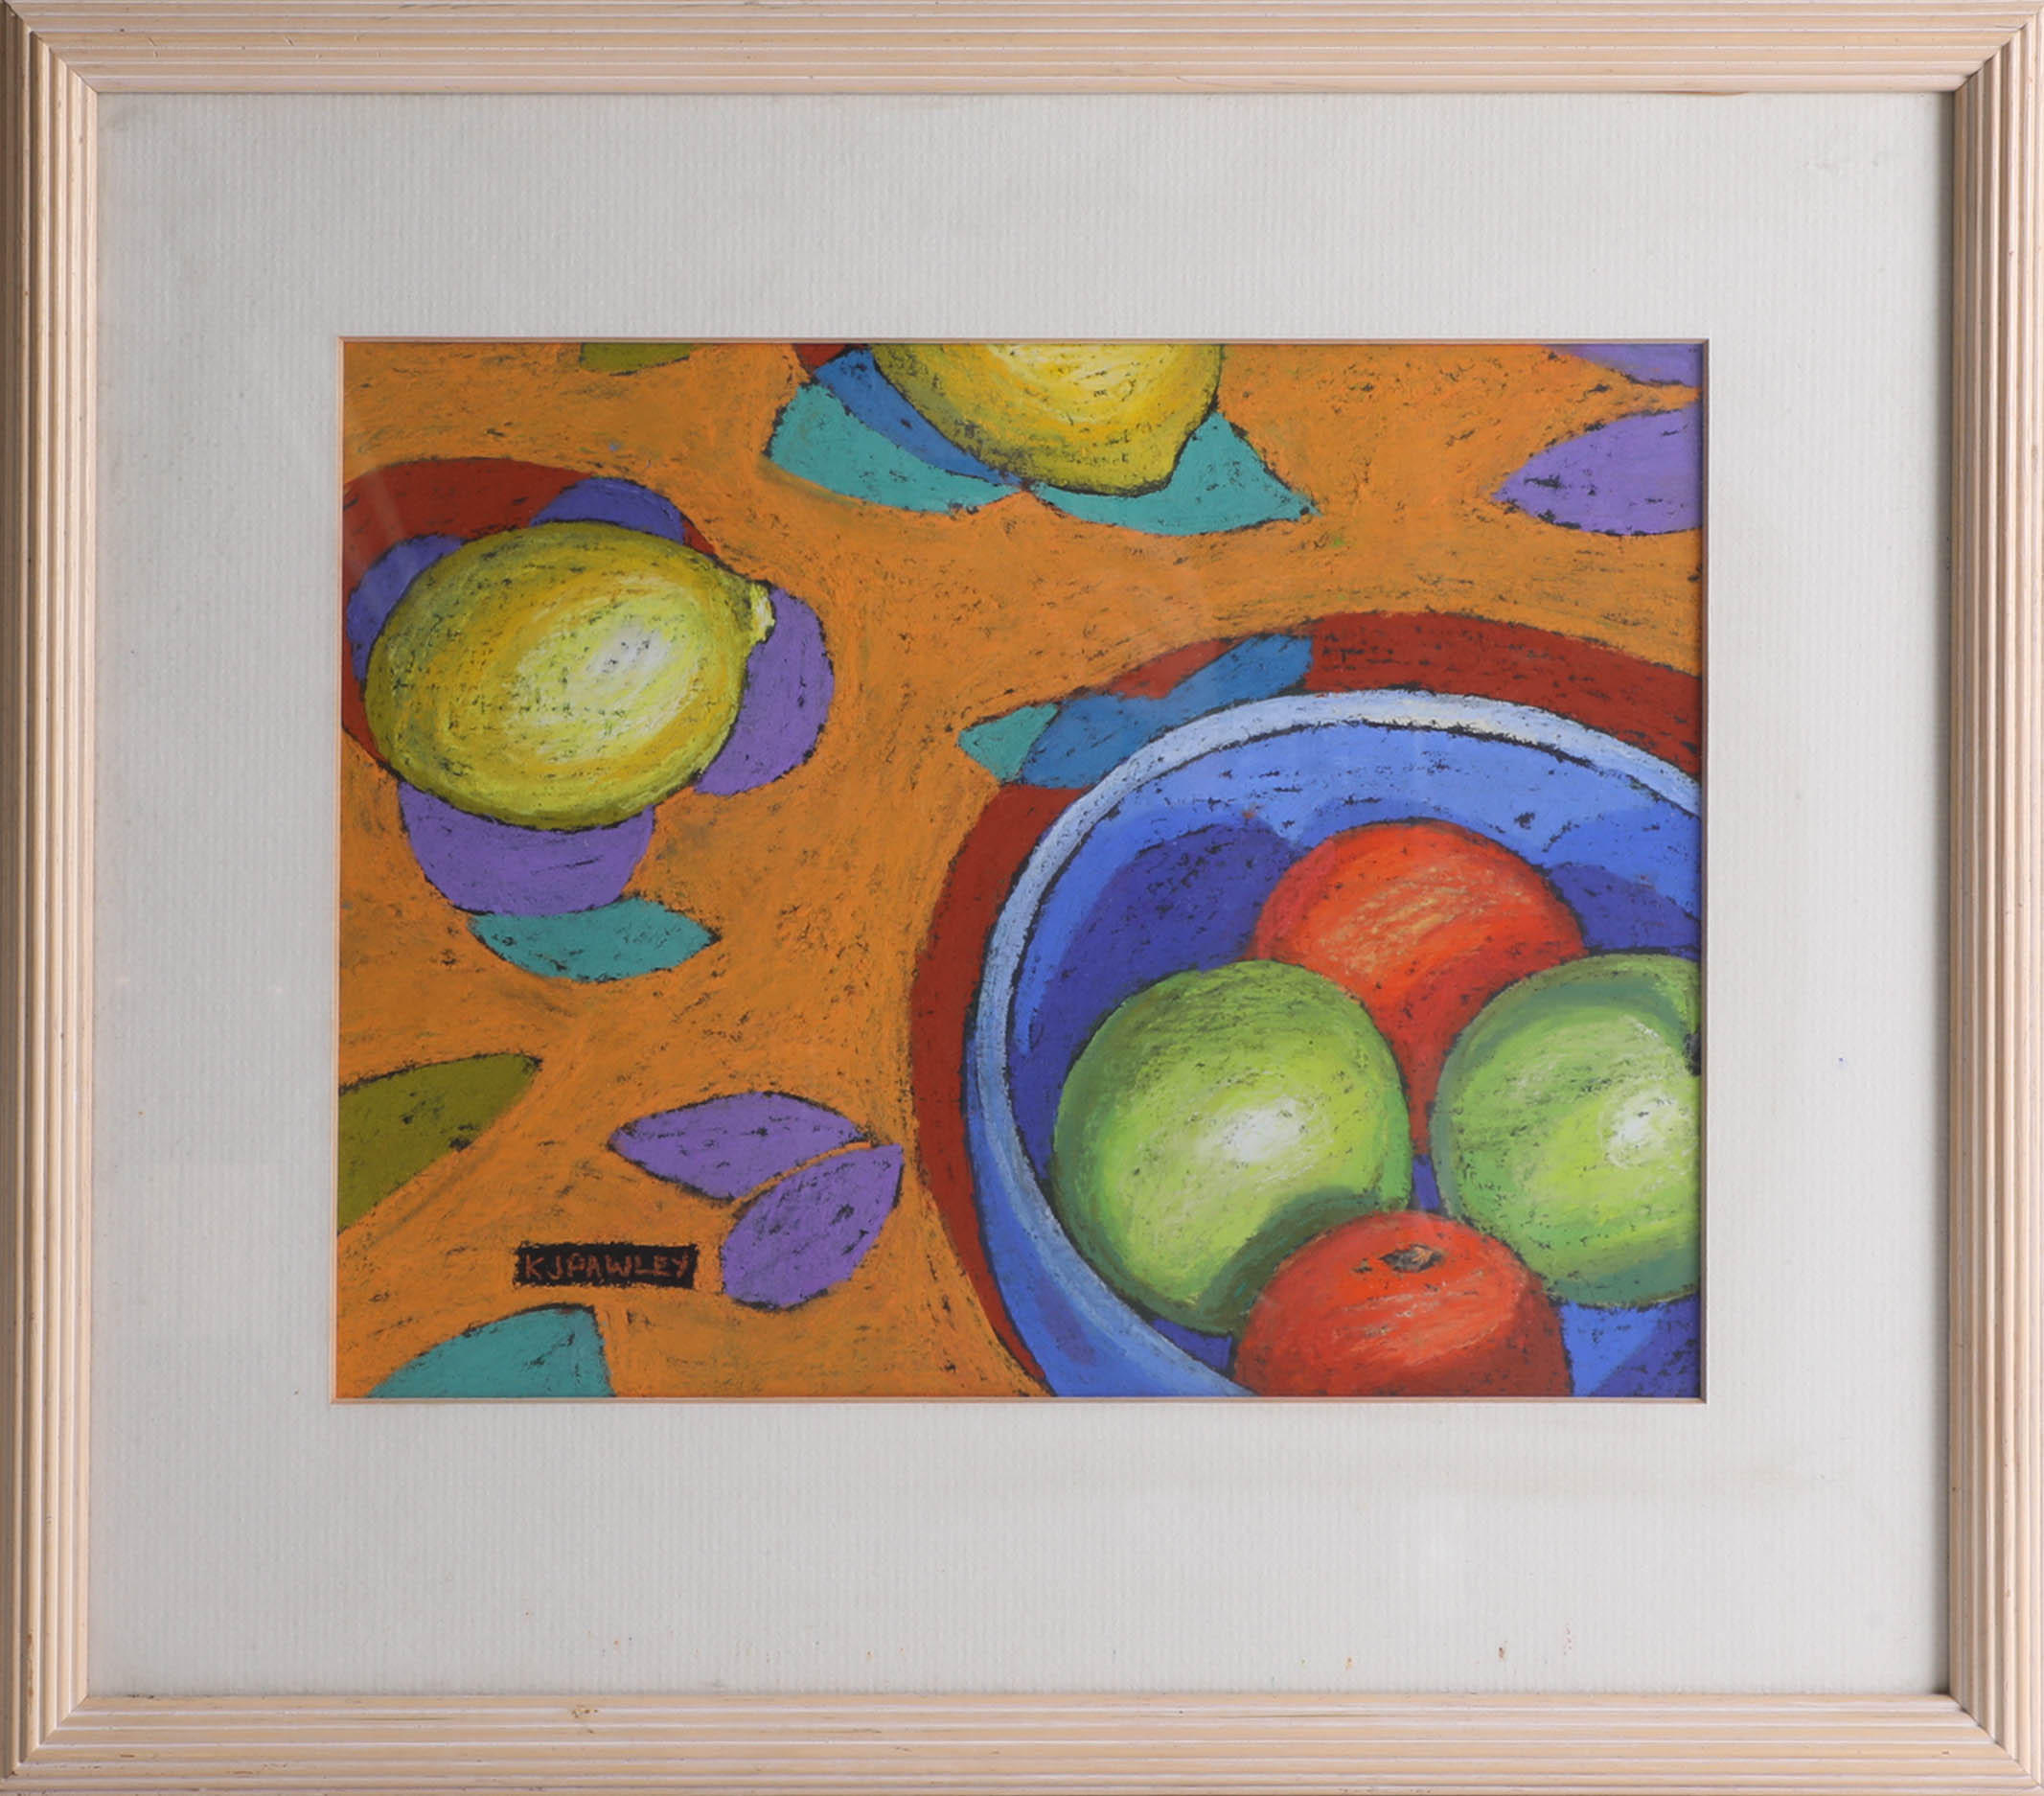 Three Karen J Pawley pastels of Flowers and Still Life, largest 45cm x 37cm (3). - Image 4 of 4